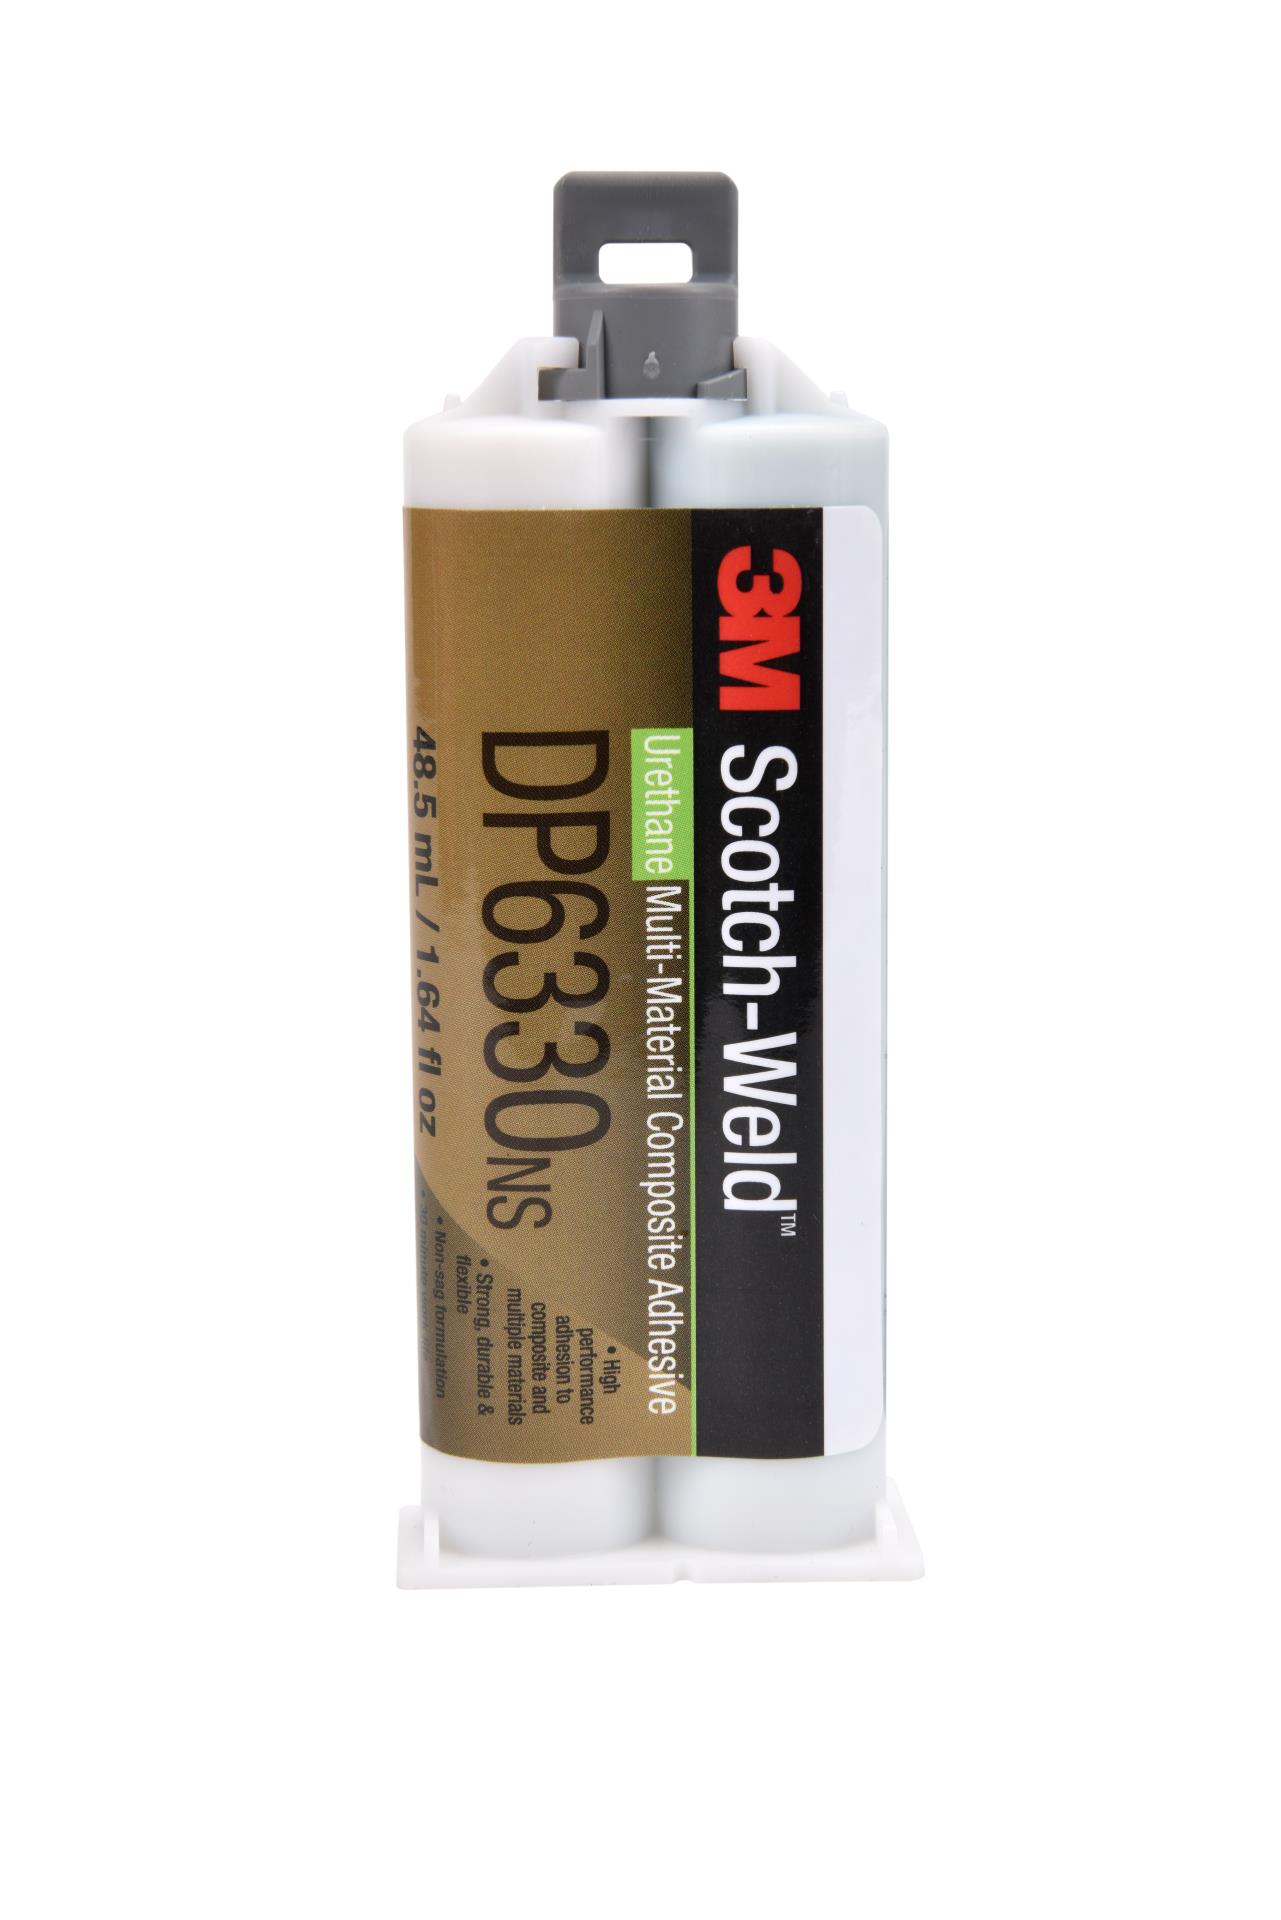 https://www.e-aircraftsupply.com/ItemImages/28/7100109828_3M_Scotch-Weld_Composite_Urethane_Adhesive_DP6330NS_Green.jpg